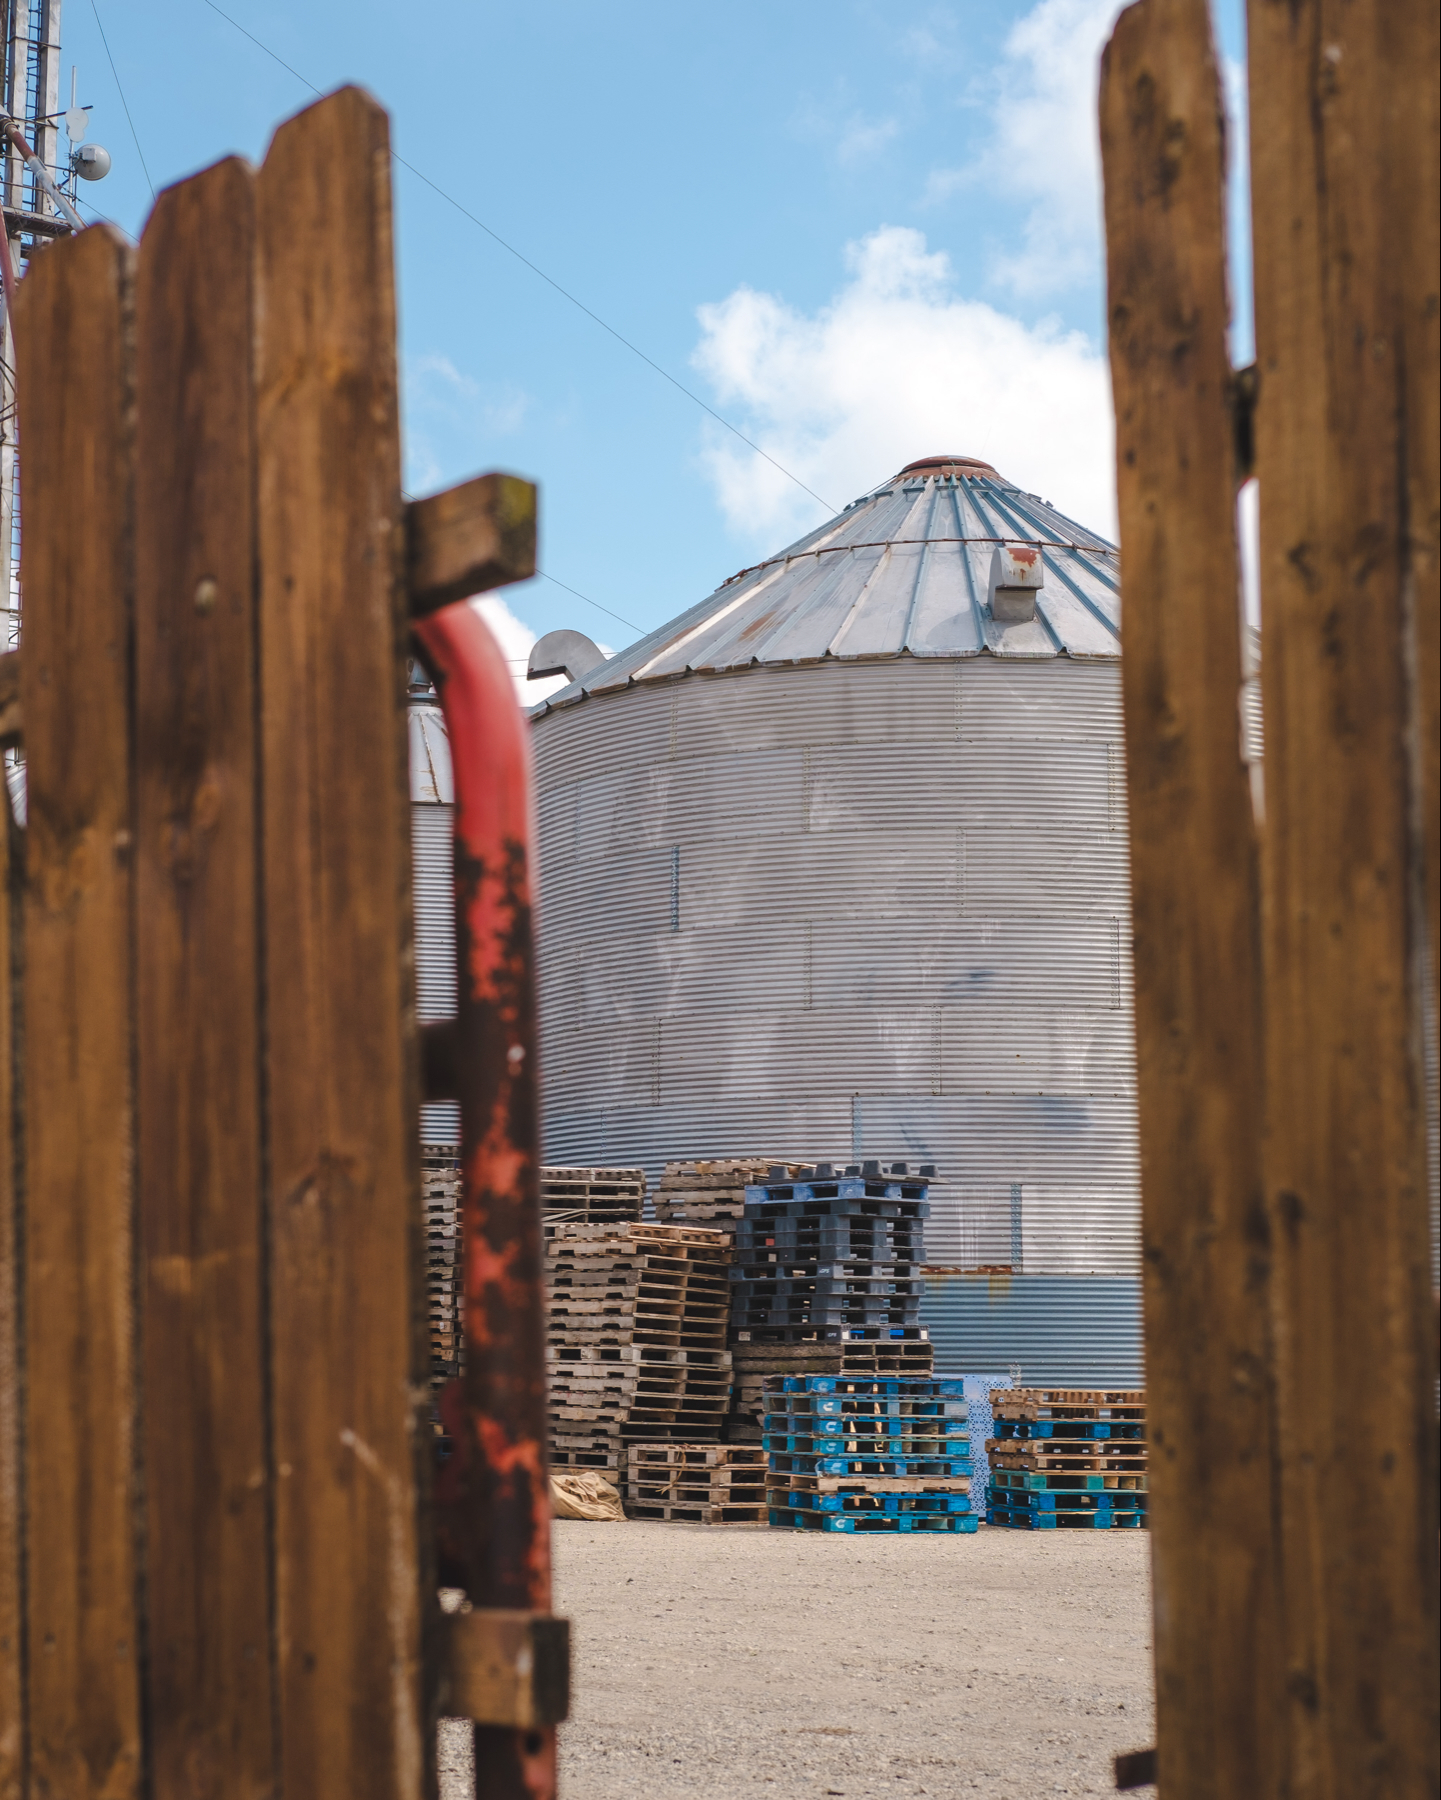 A grain silo seen between the slats of a warm brown wooden fence, with stacks of wooden and blue plastic pallets in the background.